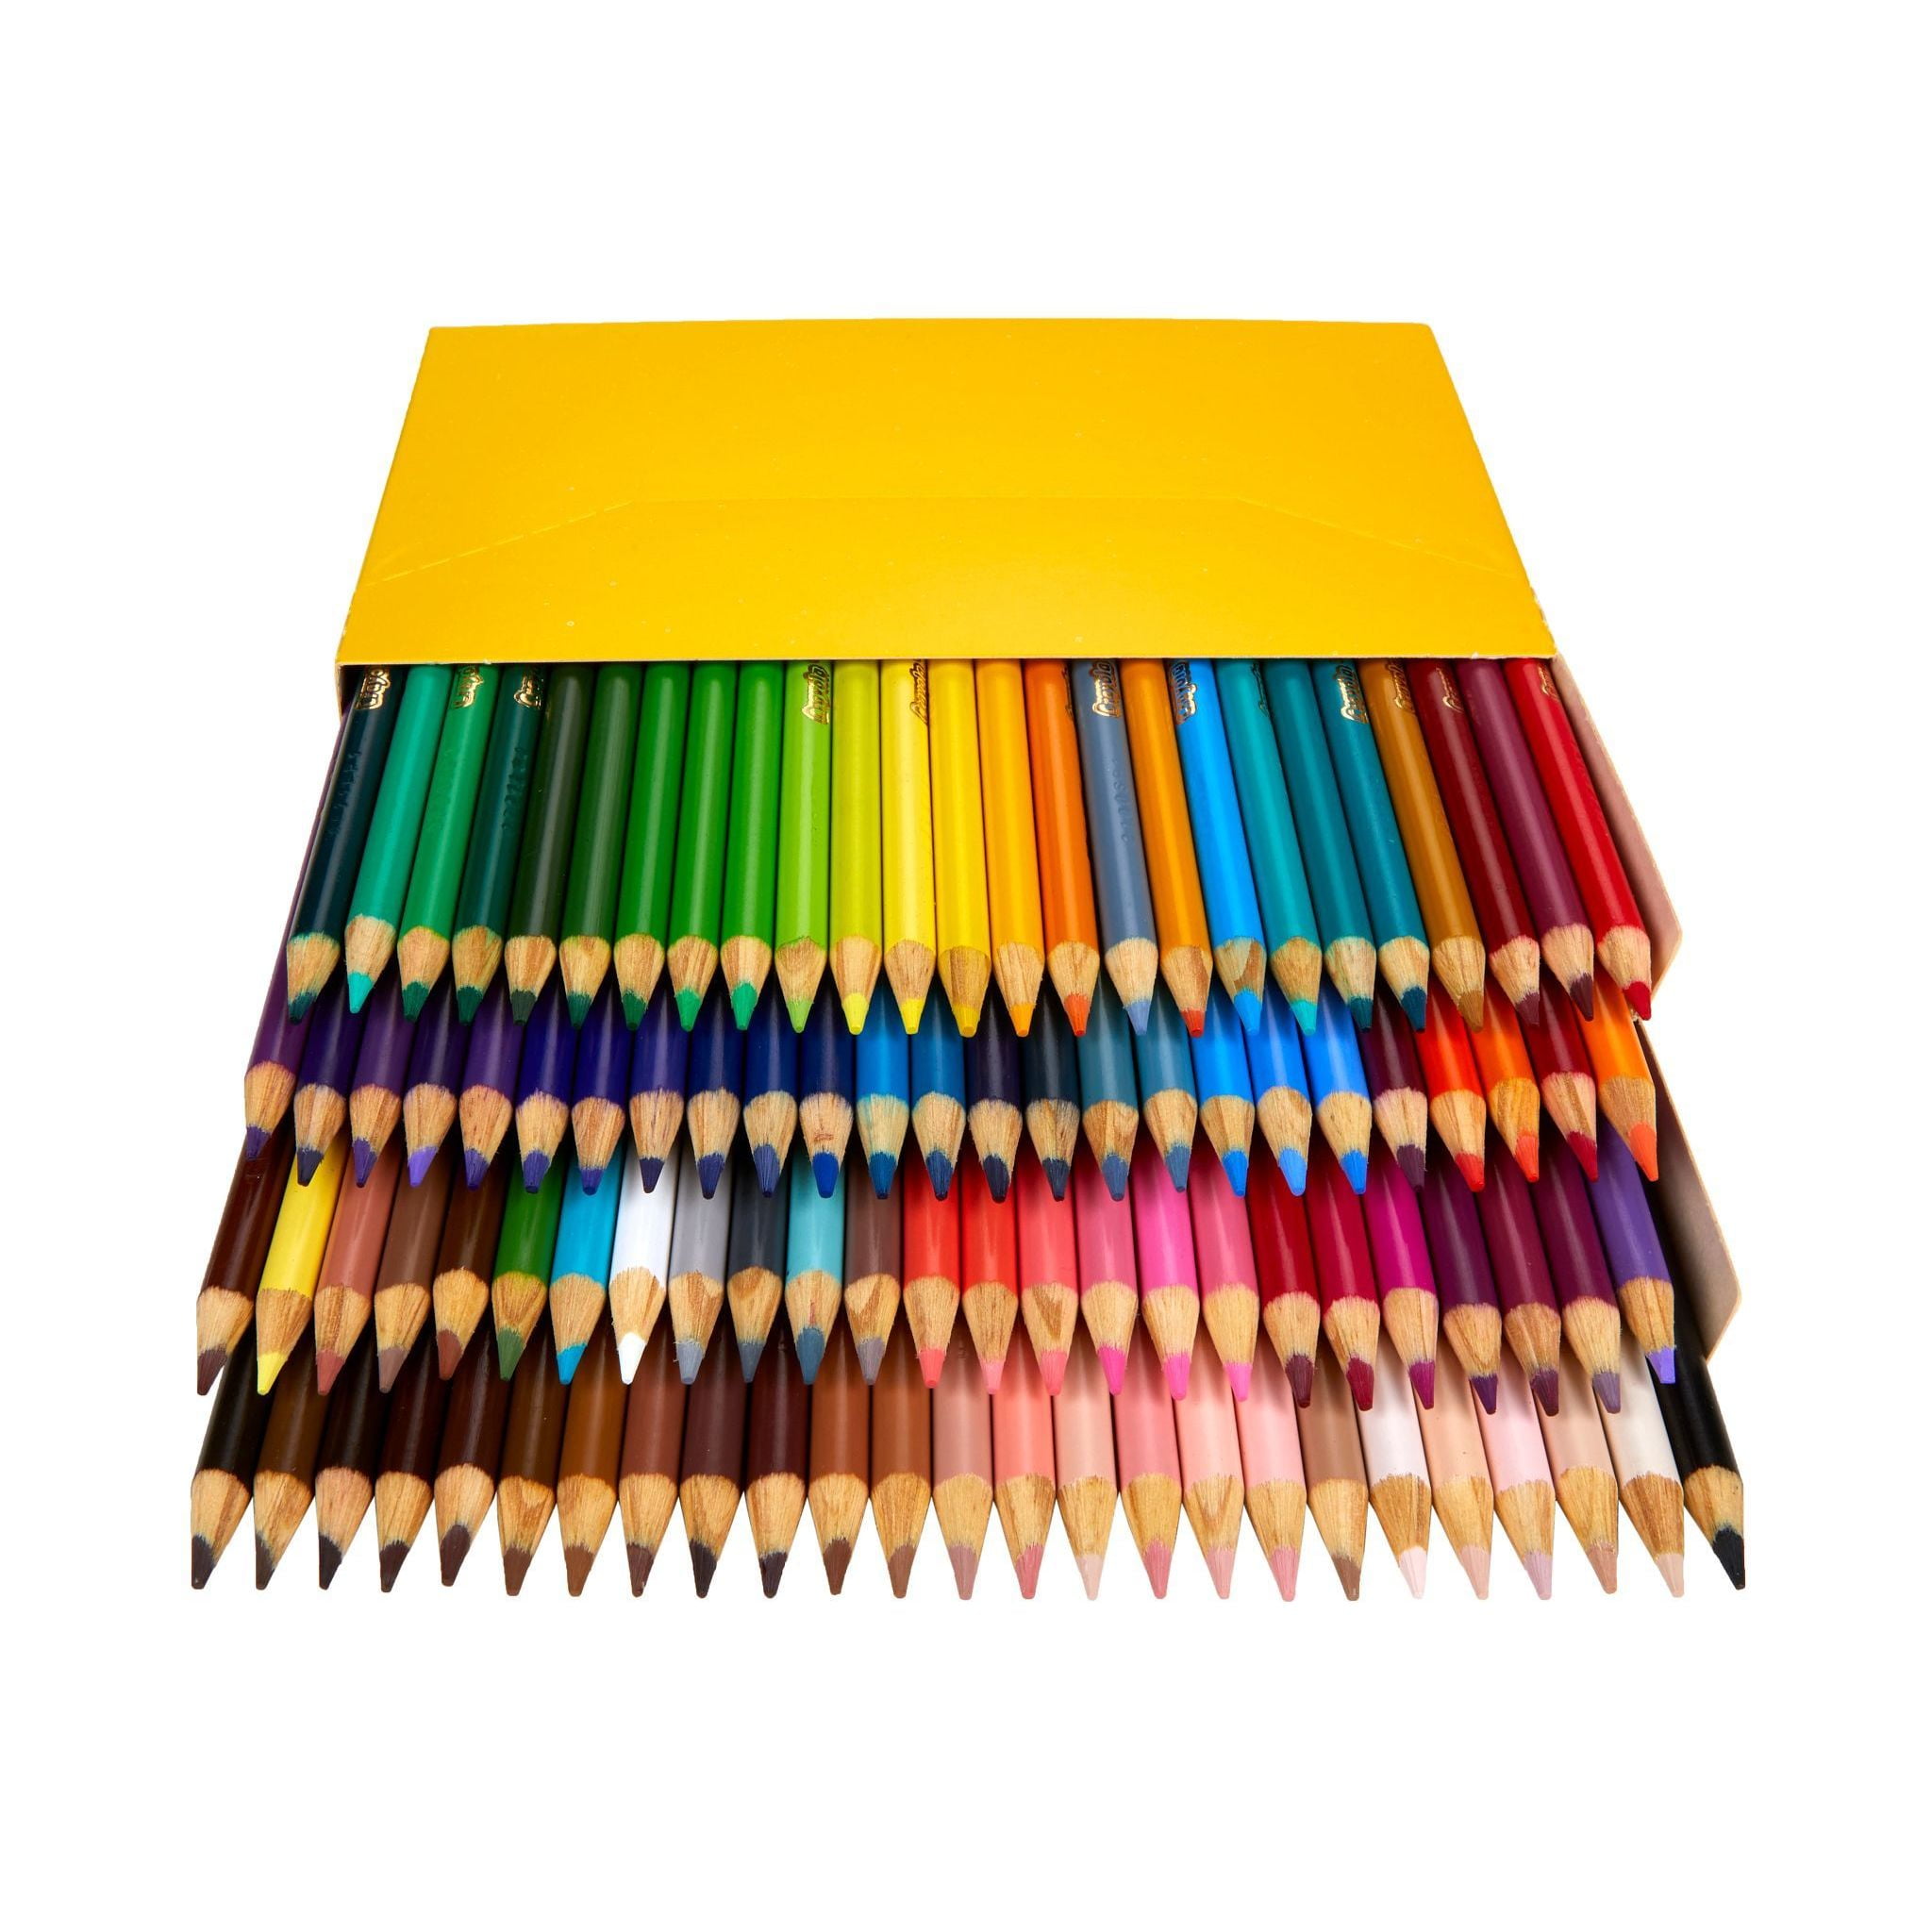 Crayola 100ct Sharpened Colored Pencils : Target